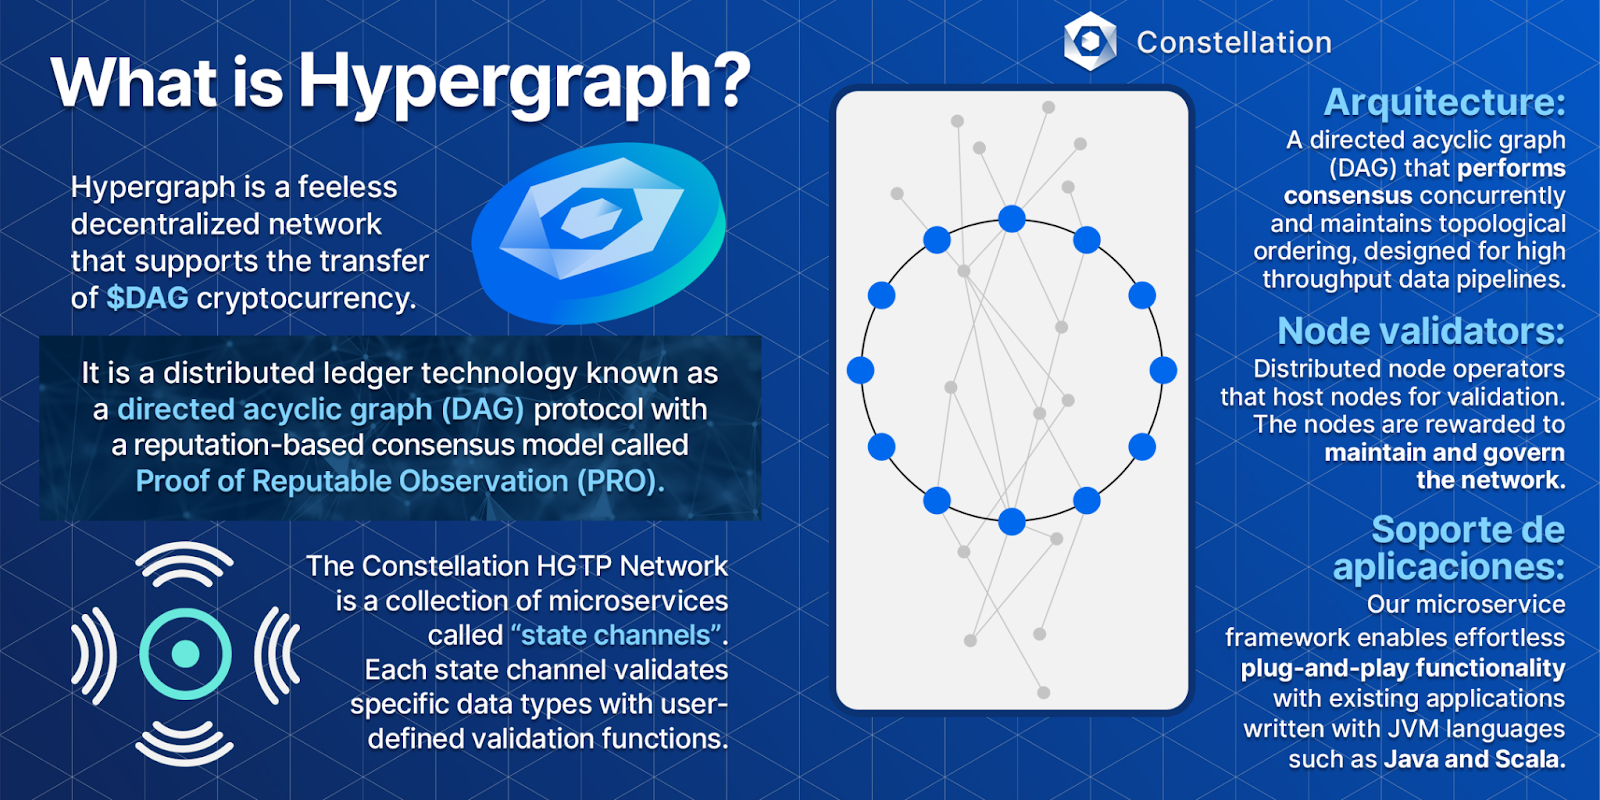 Info chart explaining "what is Hypergraph?" for Constellation Network.